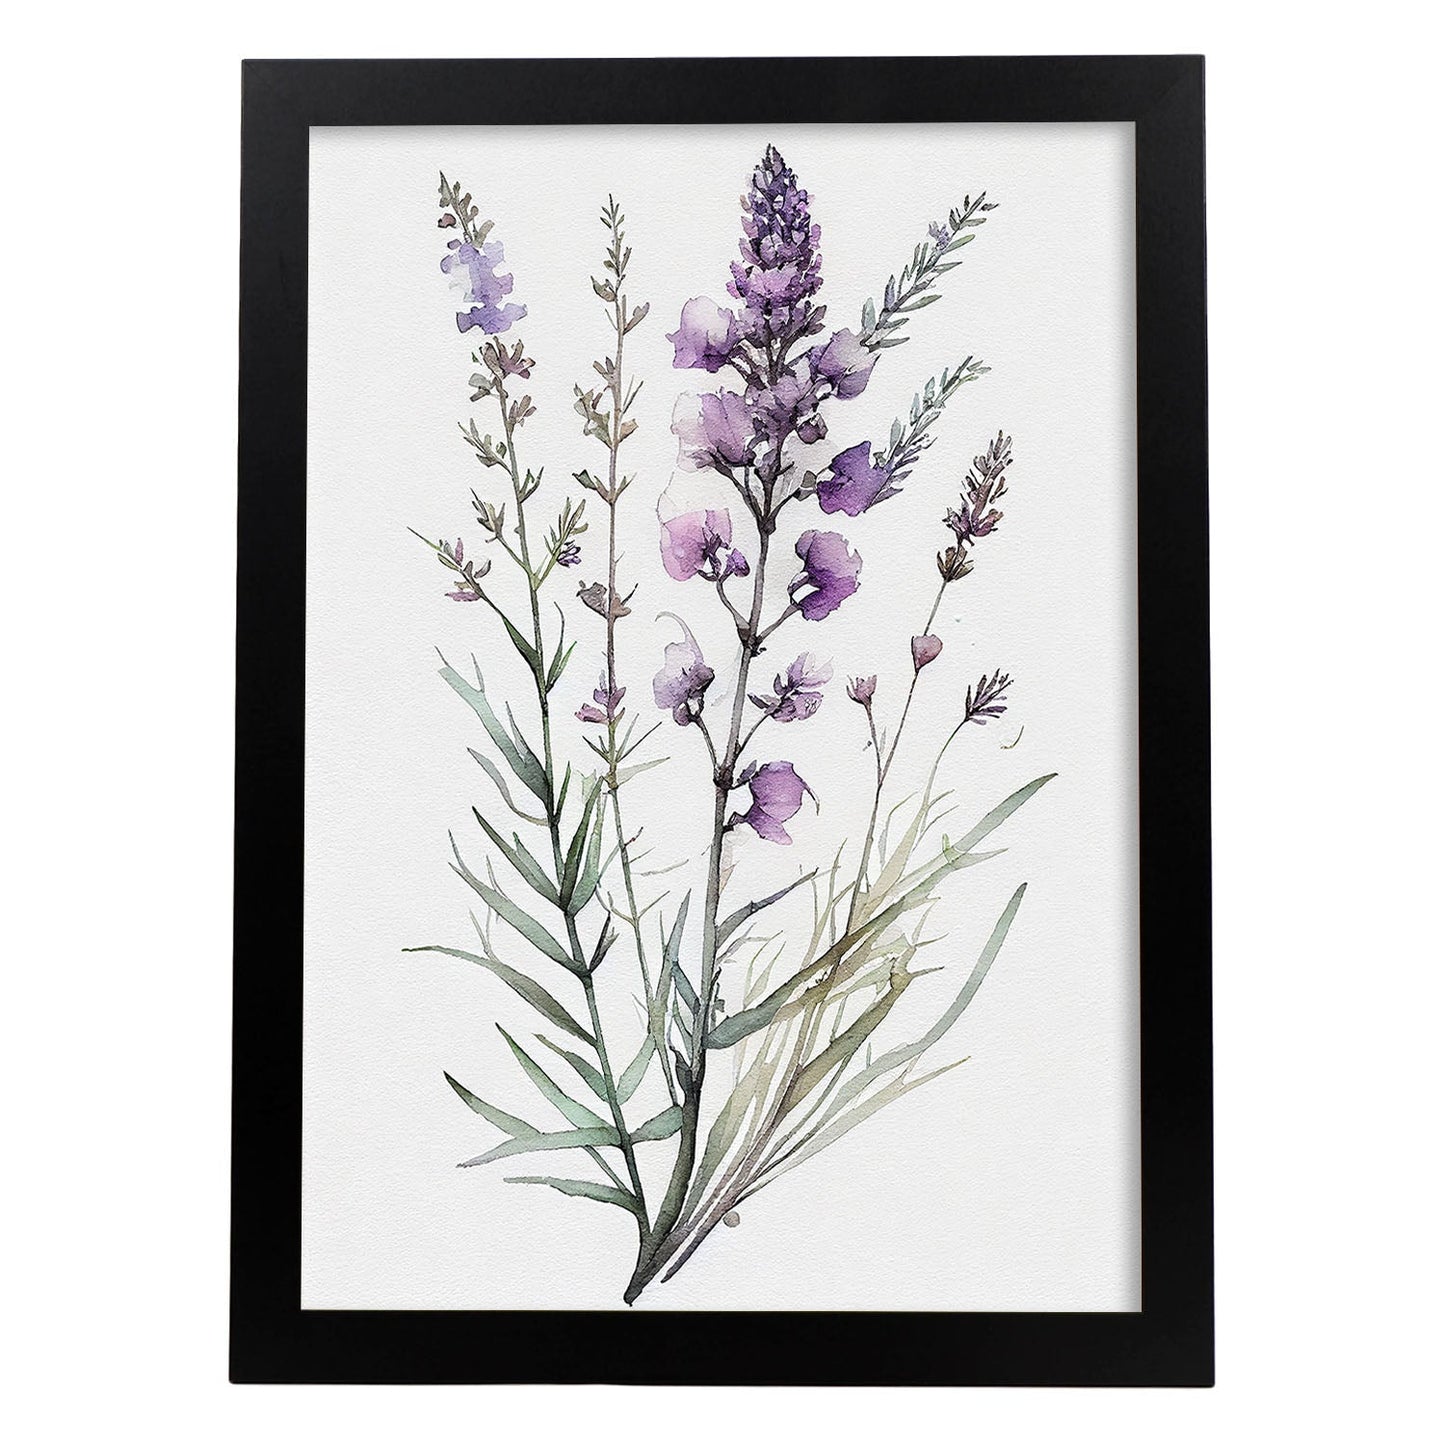 Nacnic watercolor minmal Lavender_2. Aesthetic Wall Art Prints for Bedroom or Living Room Design.